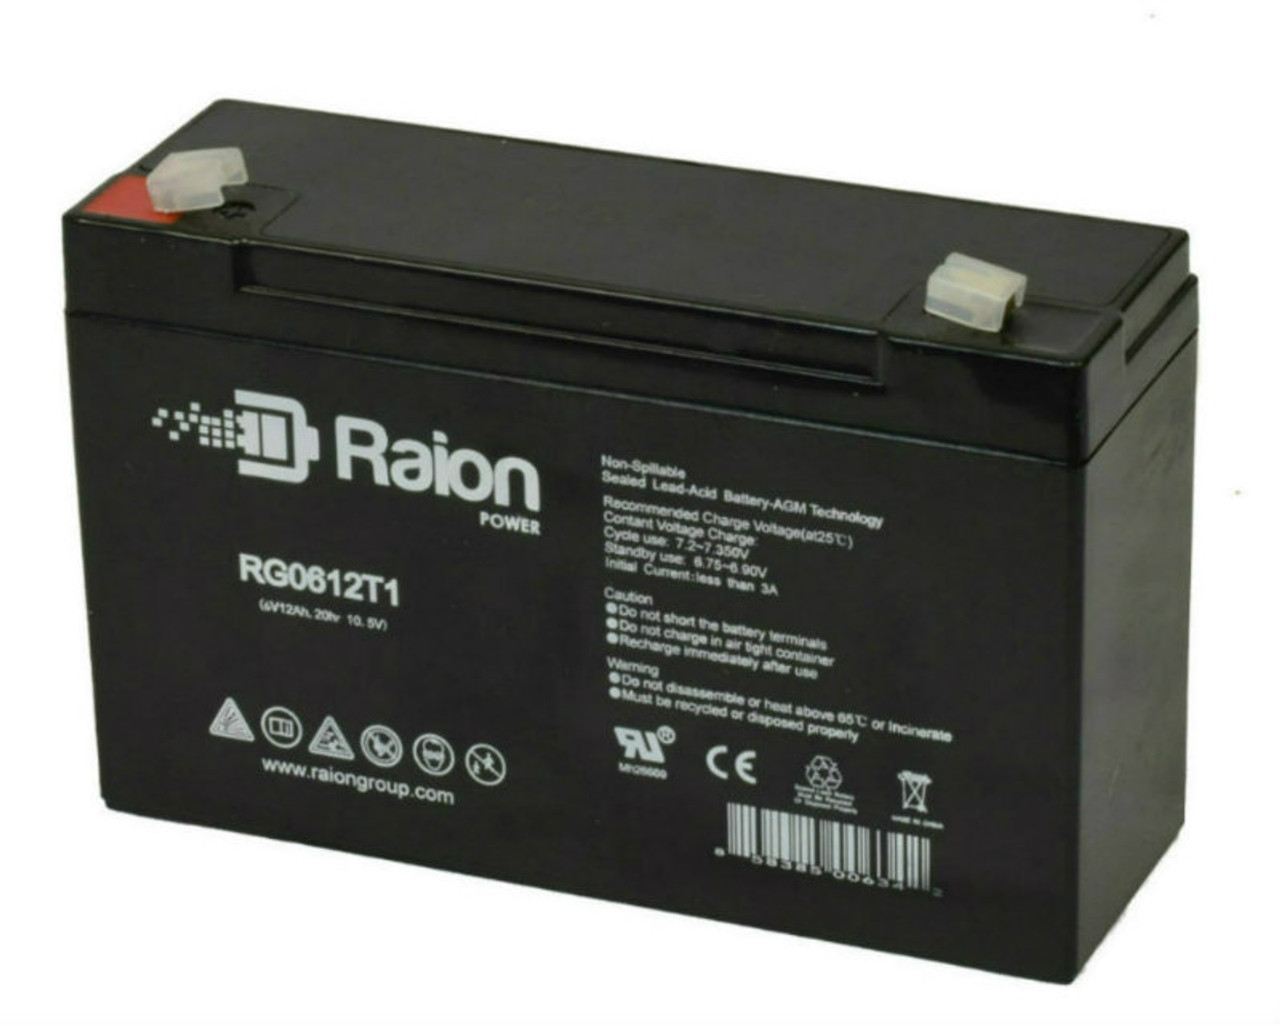 Raion Power RG06120T1 Replacement Emergency Light Battery for Dynaray DR500